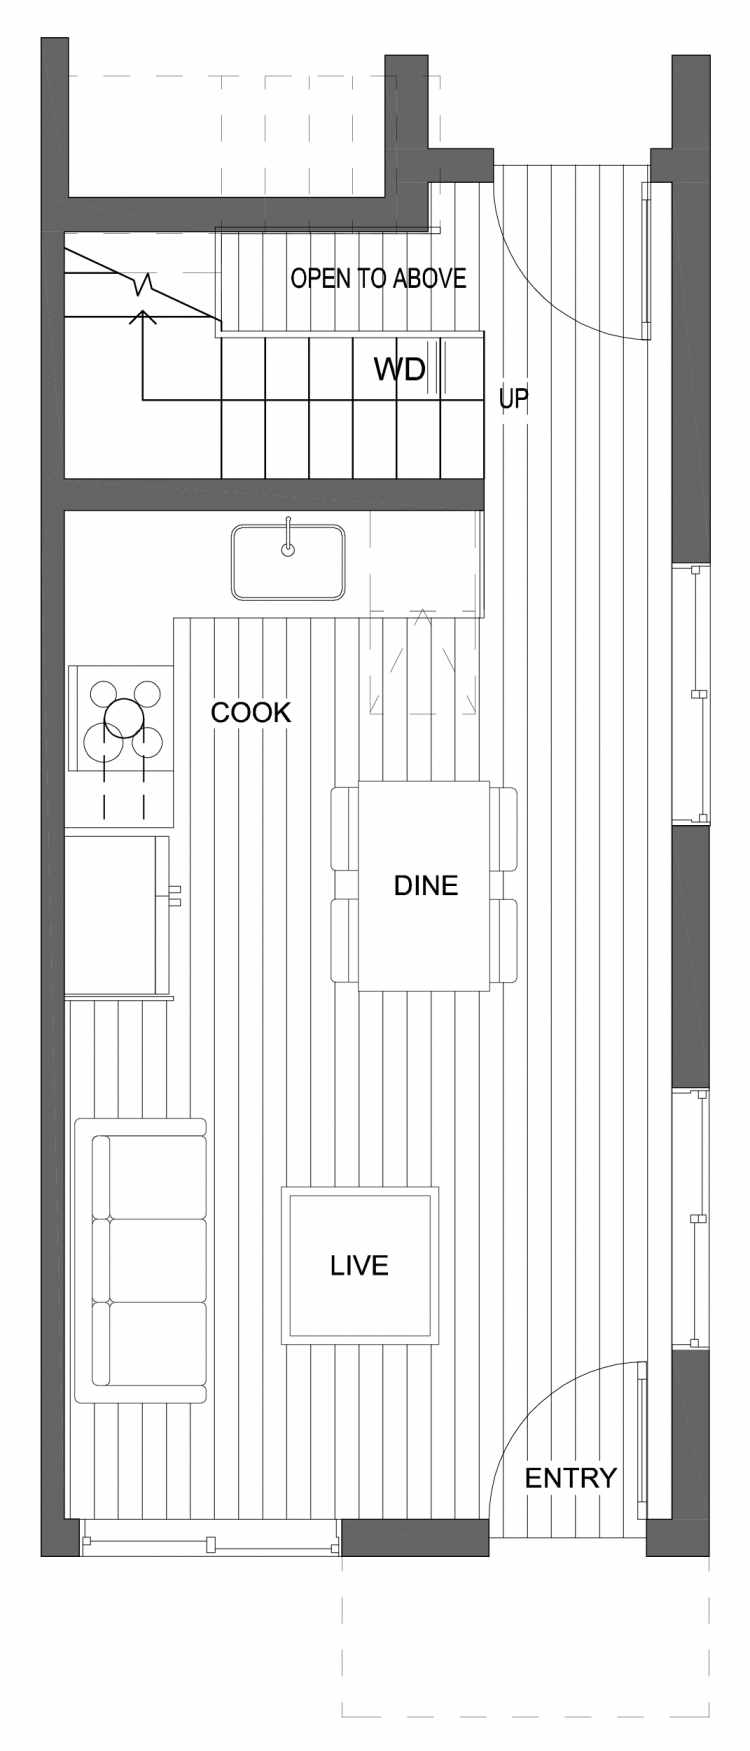 First Floor Plan of 10429H Alderbrook Pl NW, One of the Jasmine Townhomes in the Greenwood Neighborhood of Seattle